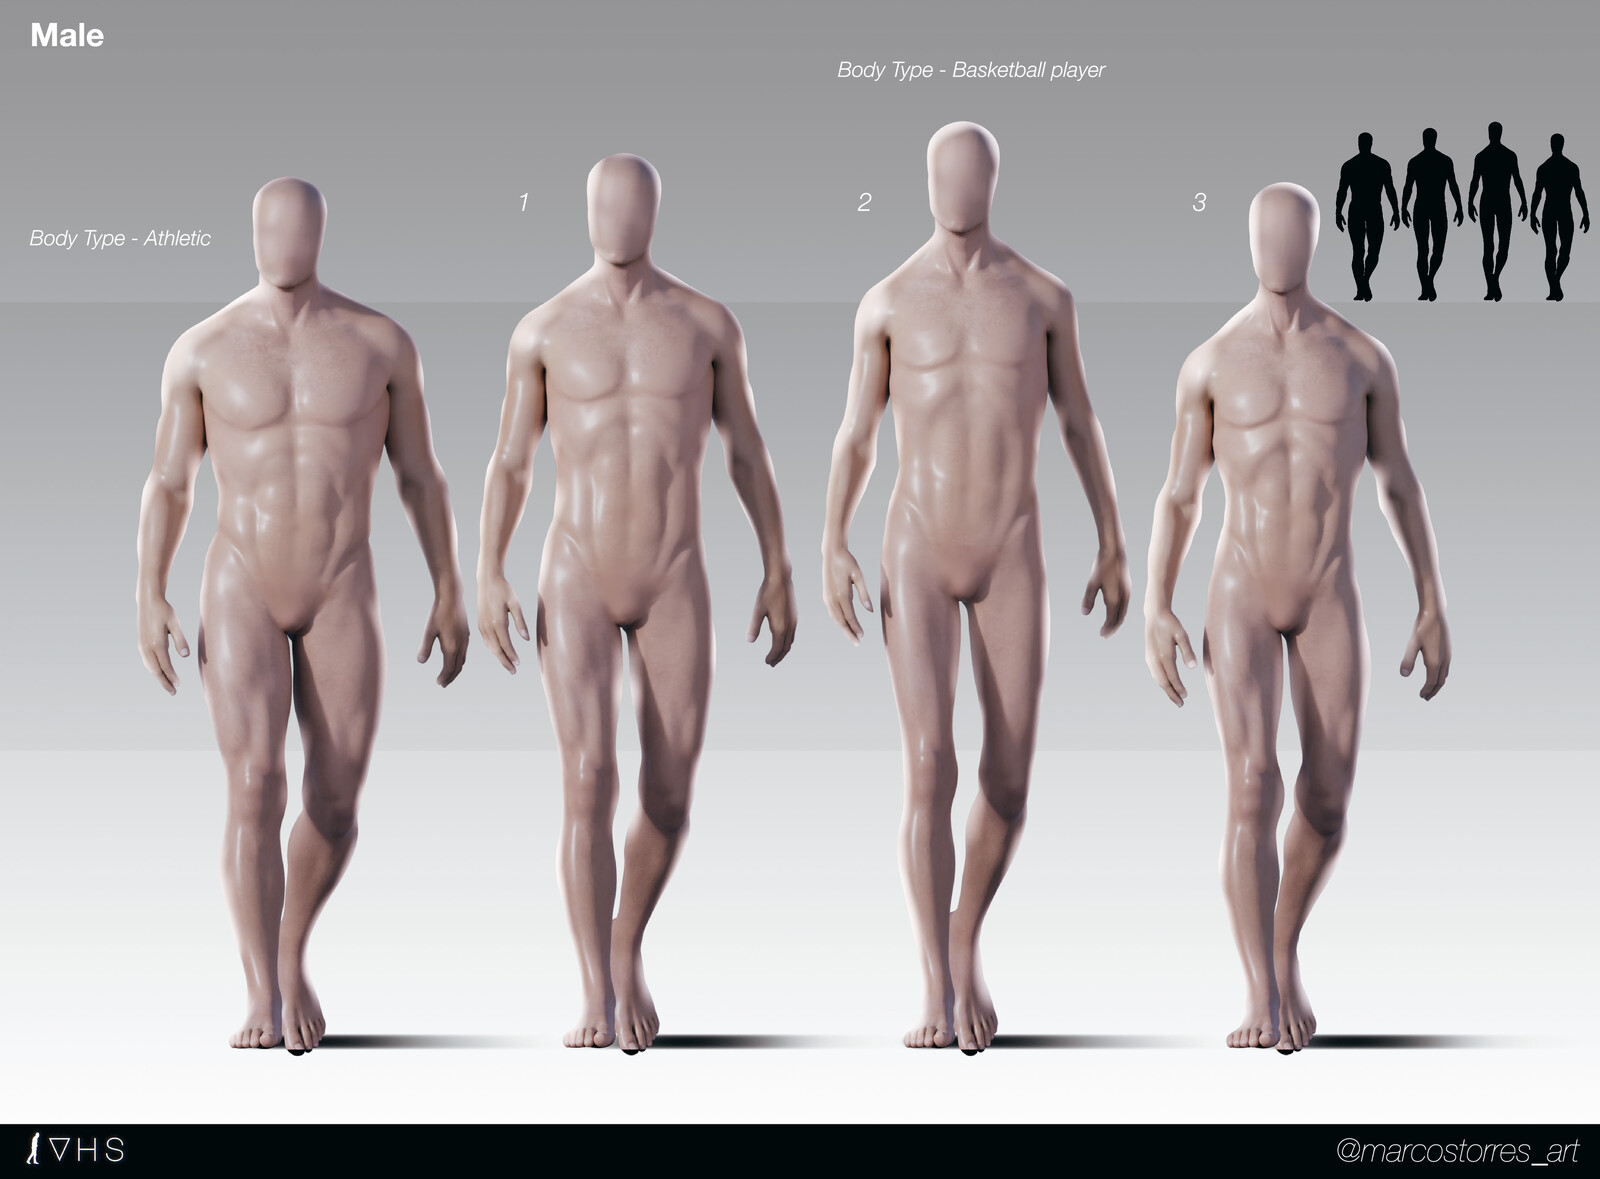 Later on we decided to stick with skin, more like an blank avatar in which the player could put his identity. Here we were trying to decided what body type would be the "poster boy"